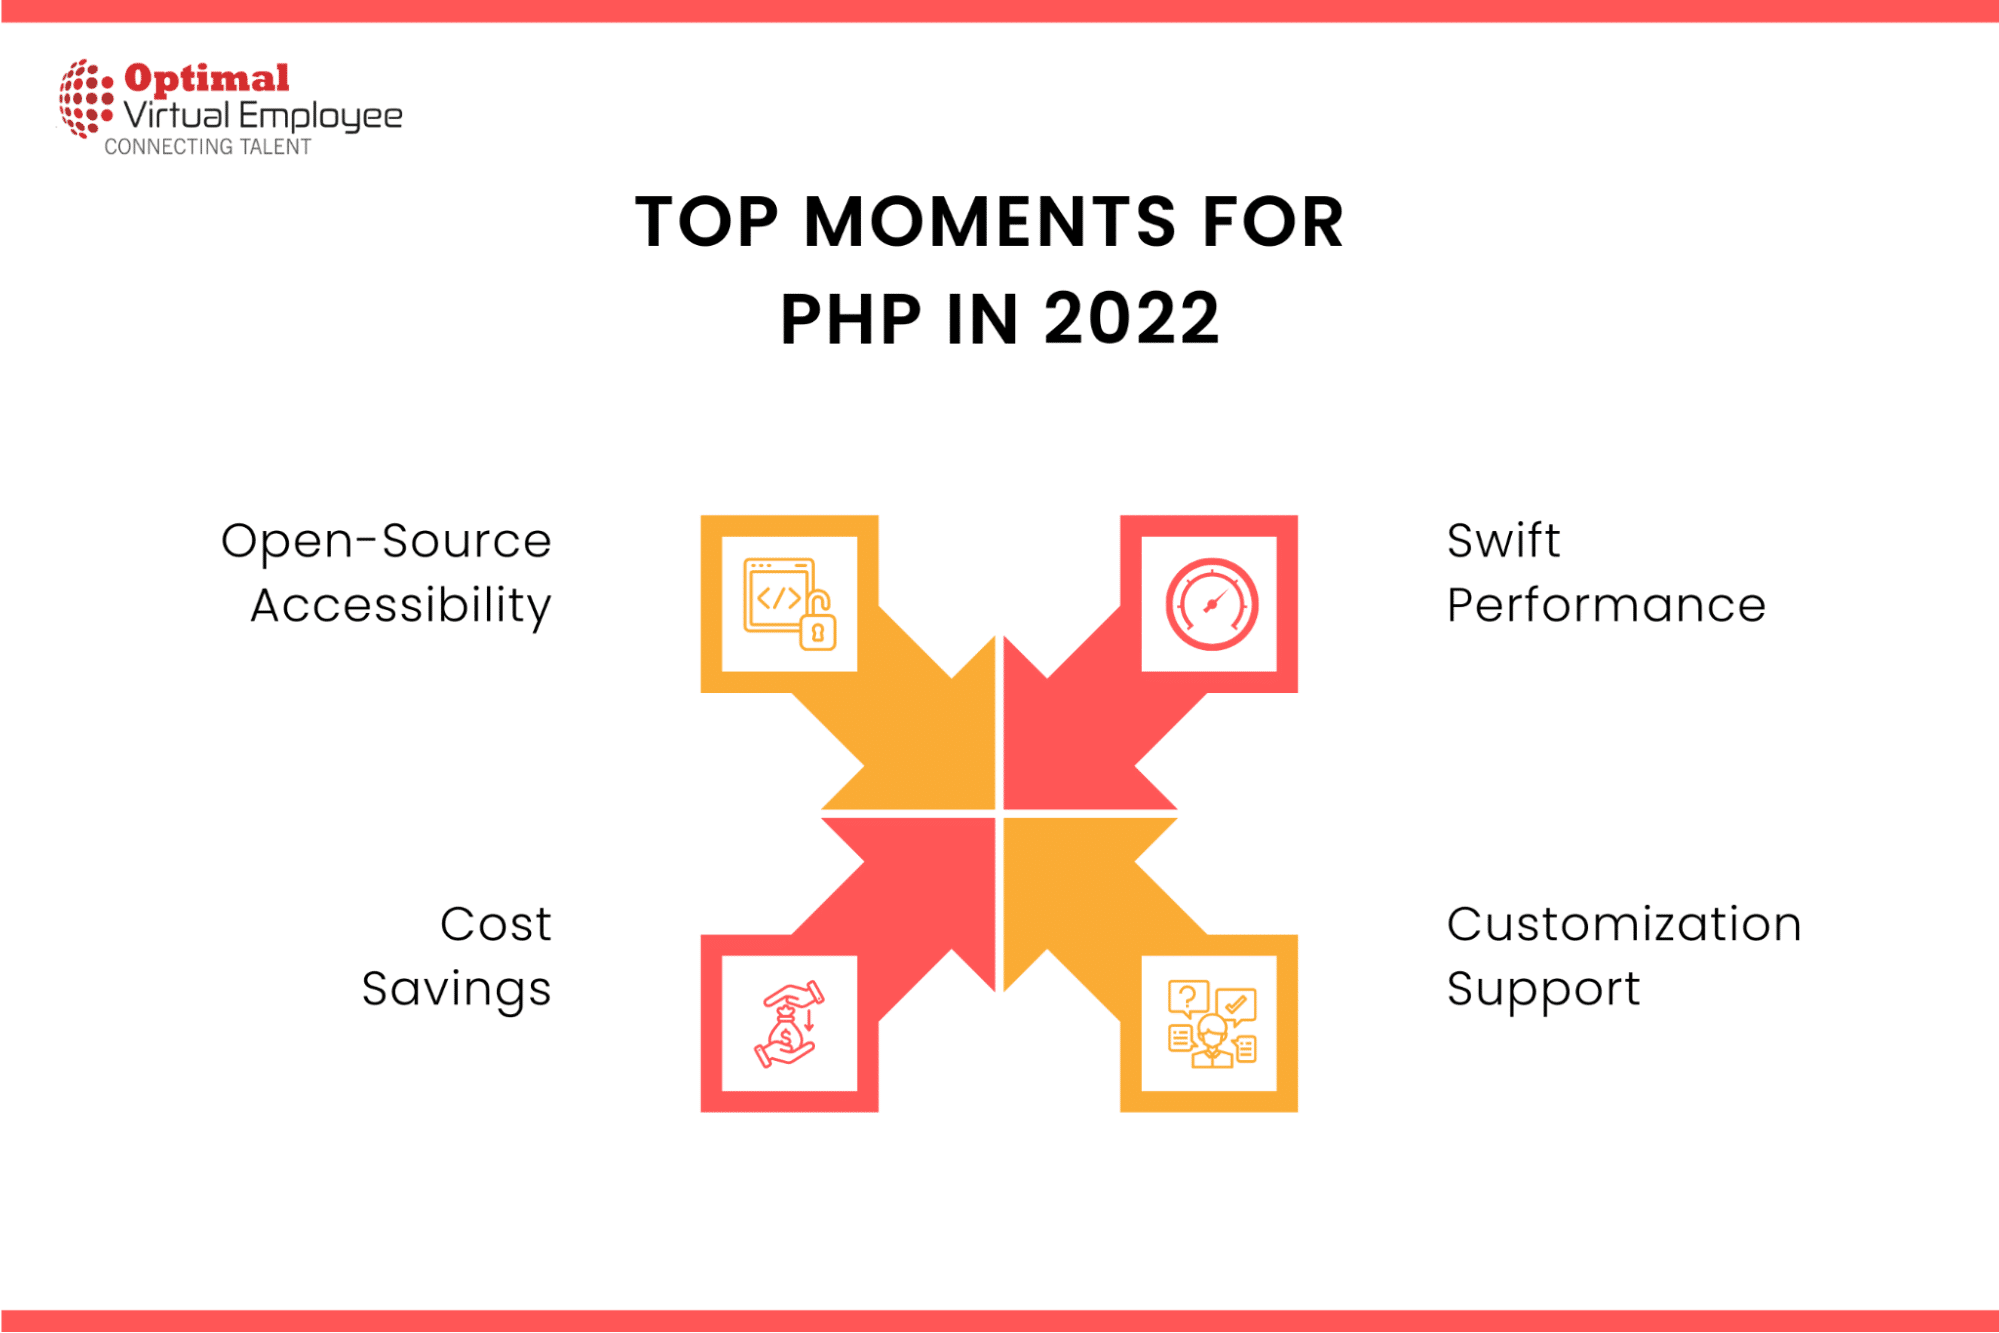 What are the Top Moments for PHP in 2022